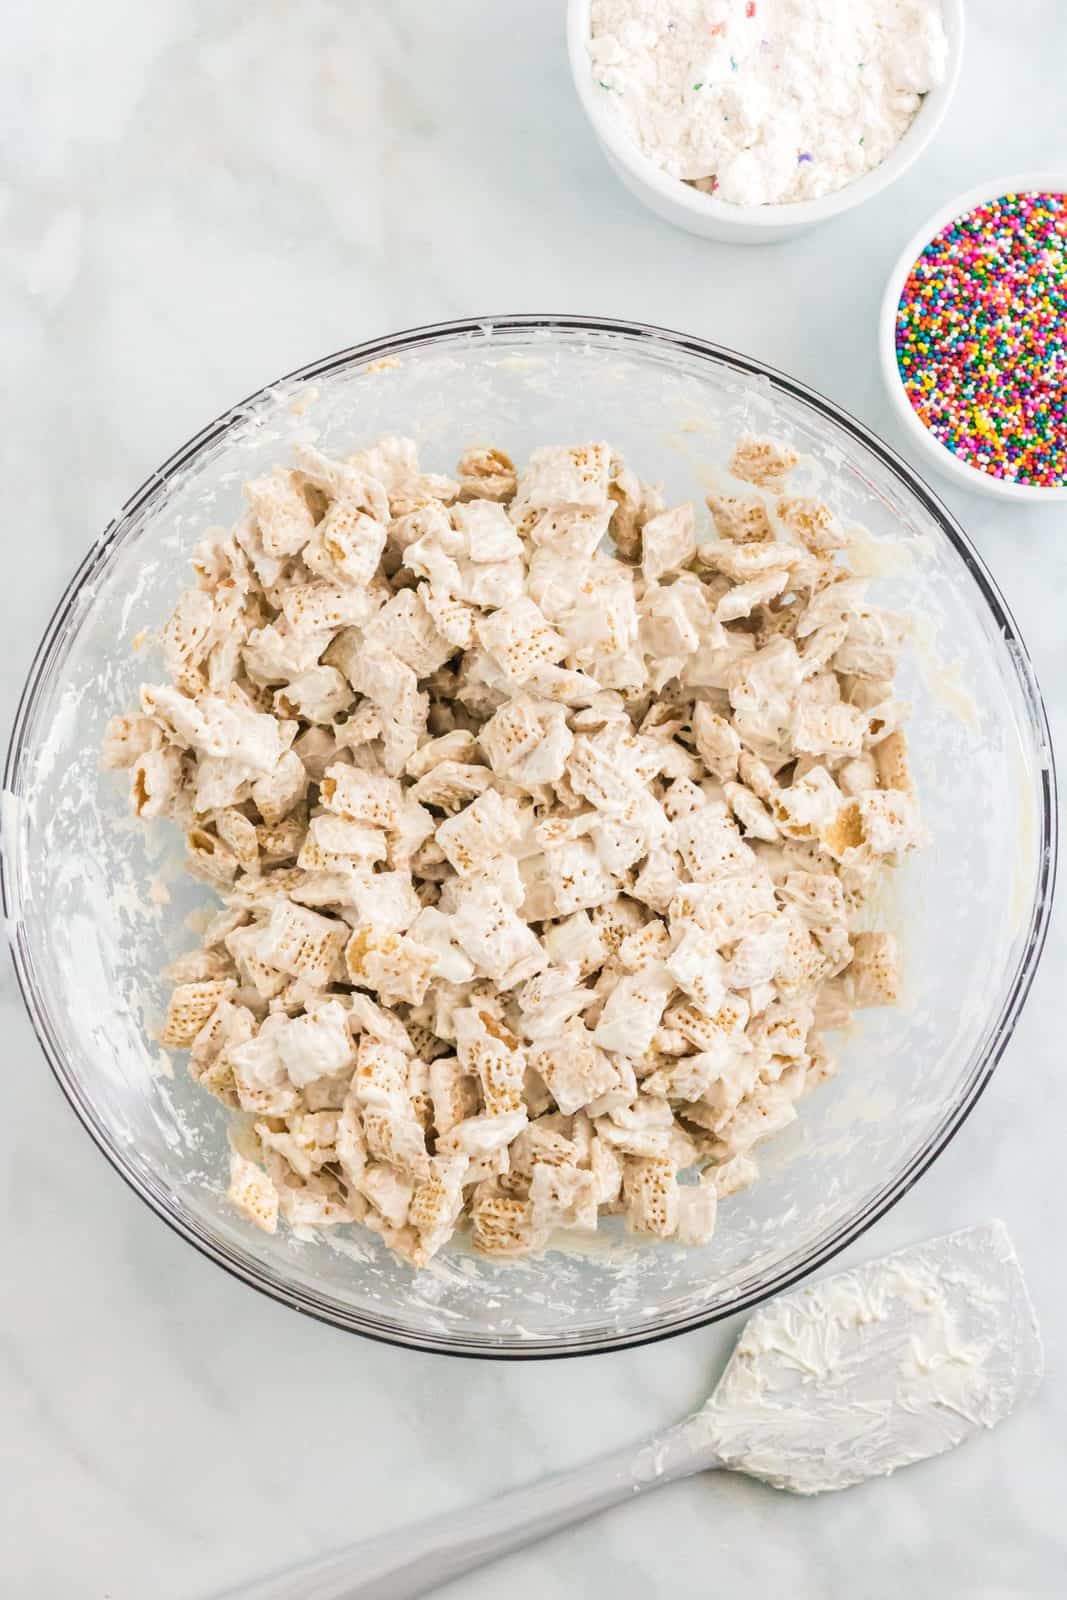 Chex cereal stirred into melted candy melts.